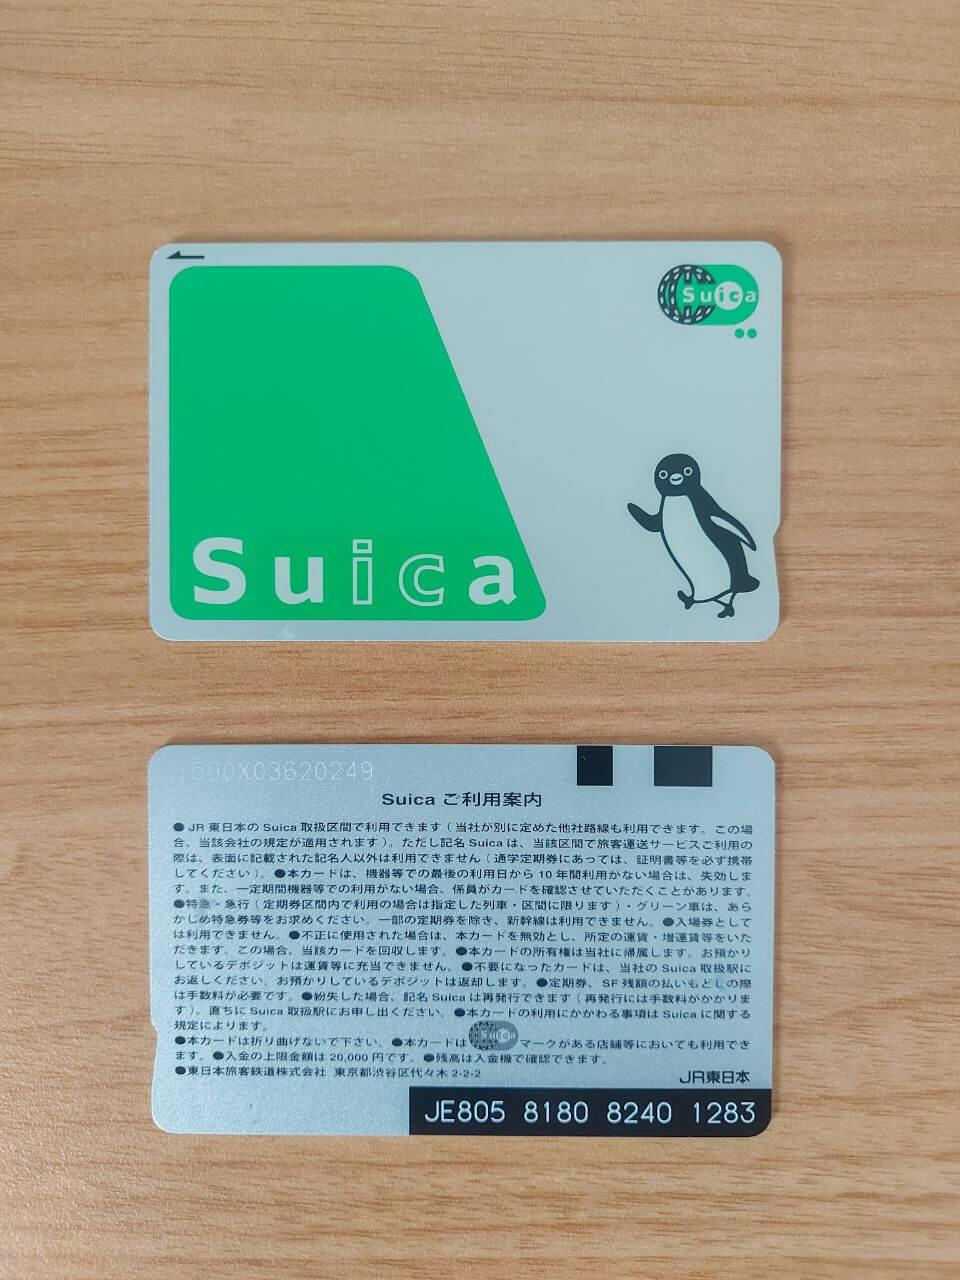 Suica Card - front and back